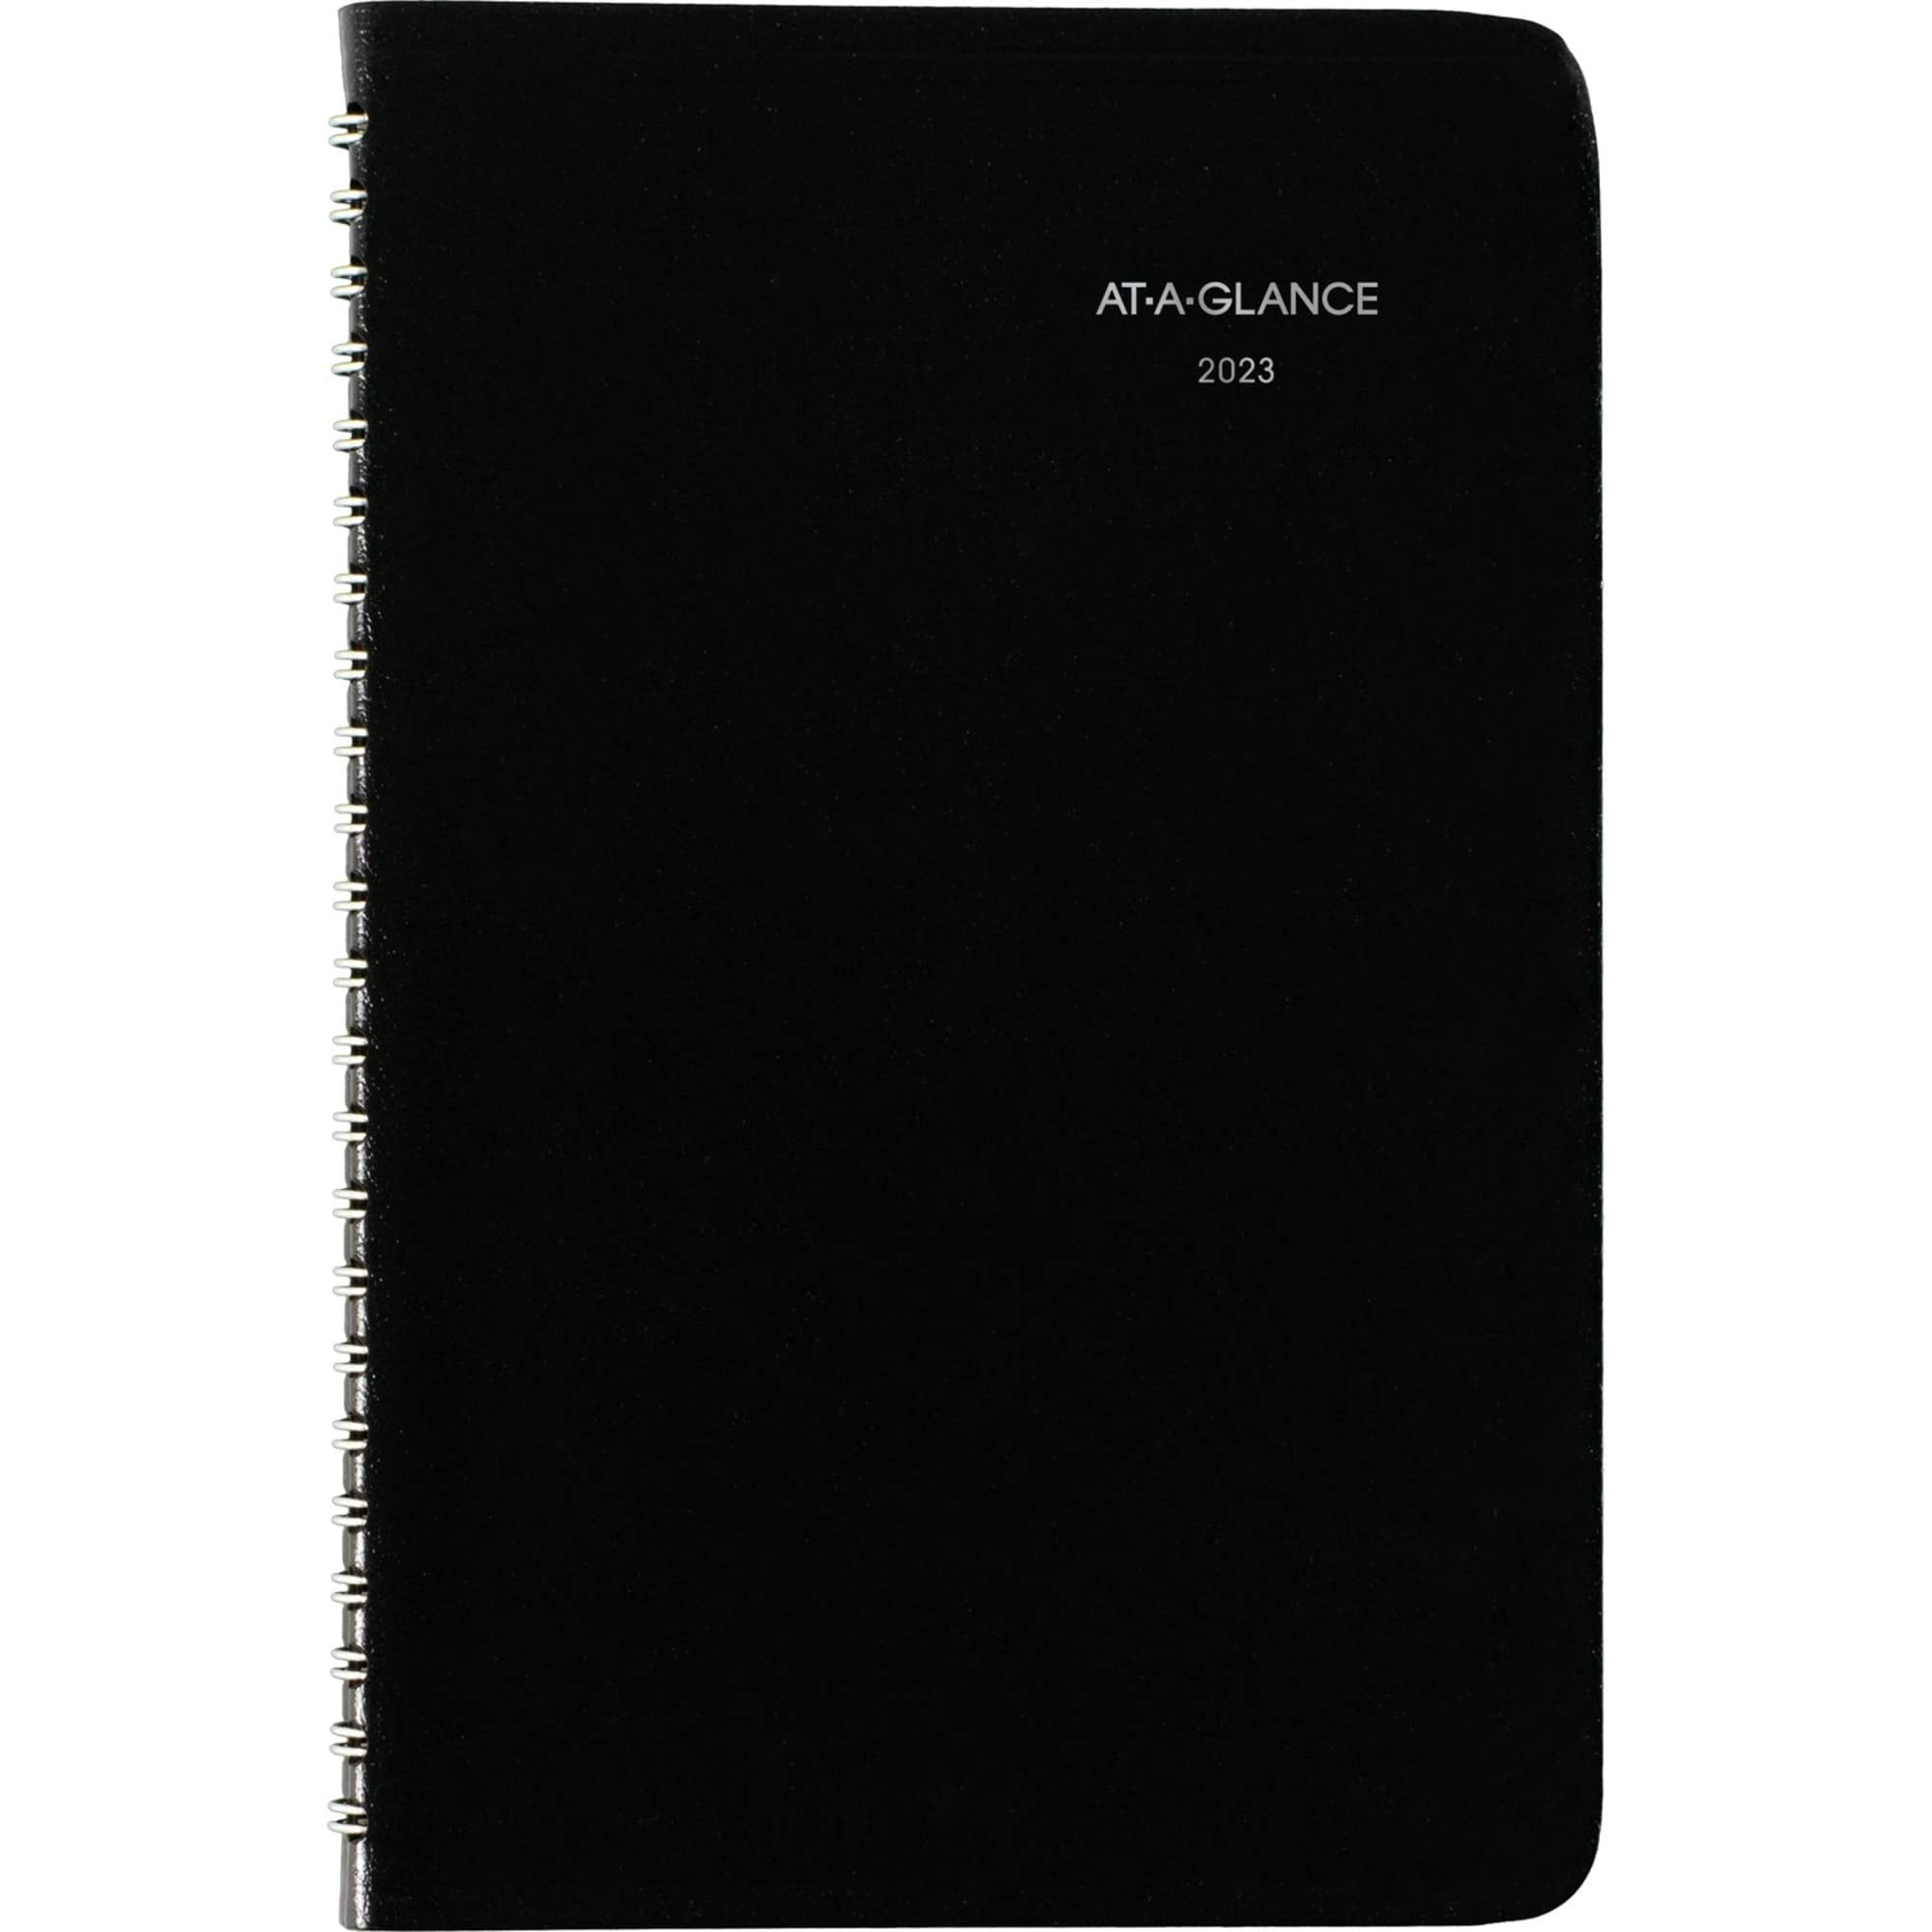 AT-A-GLANCE 2023 Weekly Planner, DayMinder, Hourly Appointment Book, 5-1/2" x 8-1/2", Small, Tabbed Telephone/Address Pages, Black (G21000)